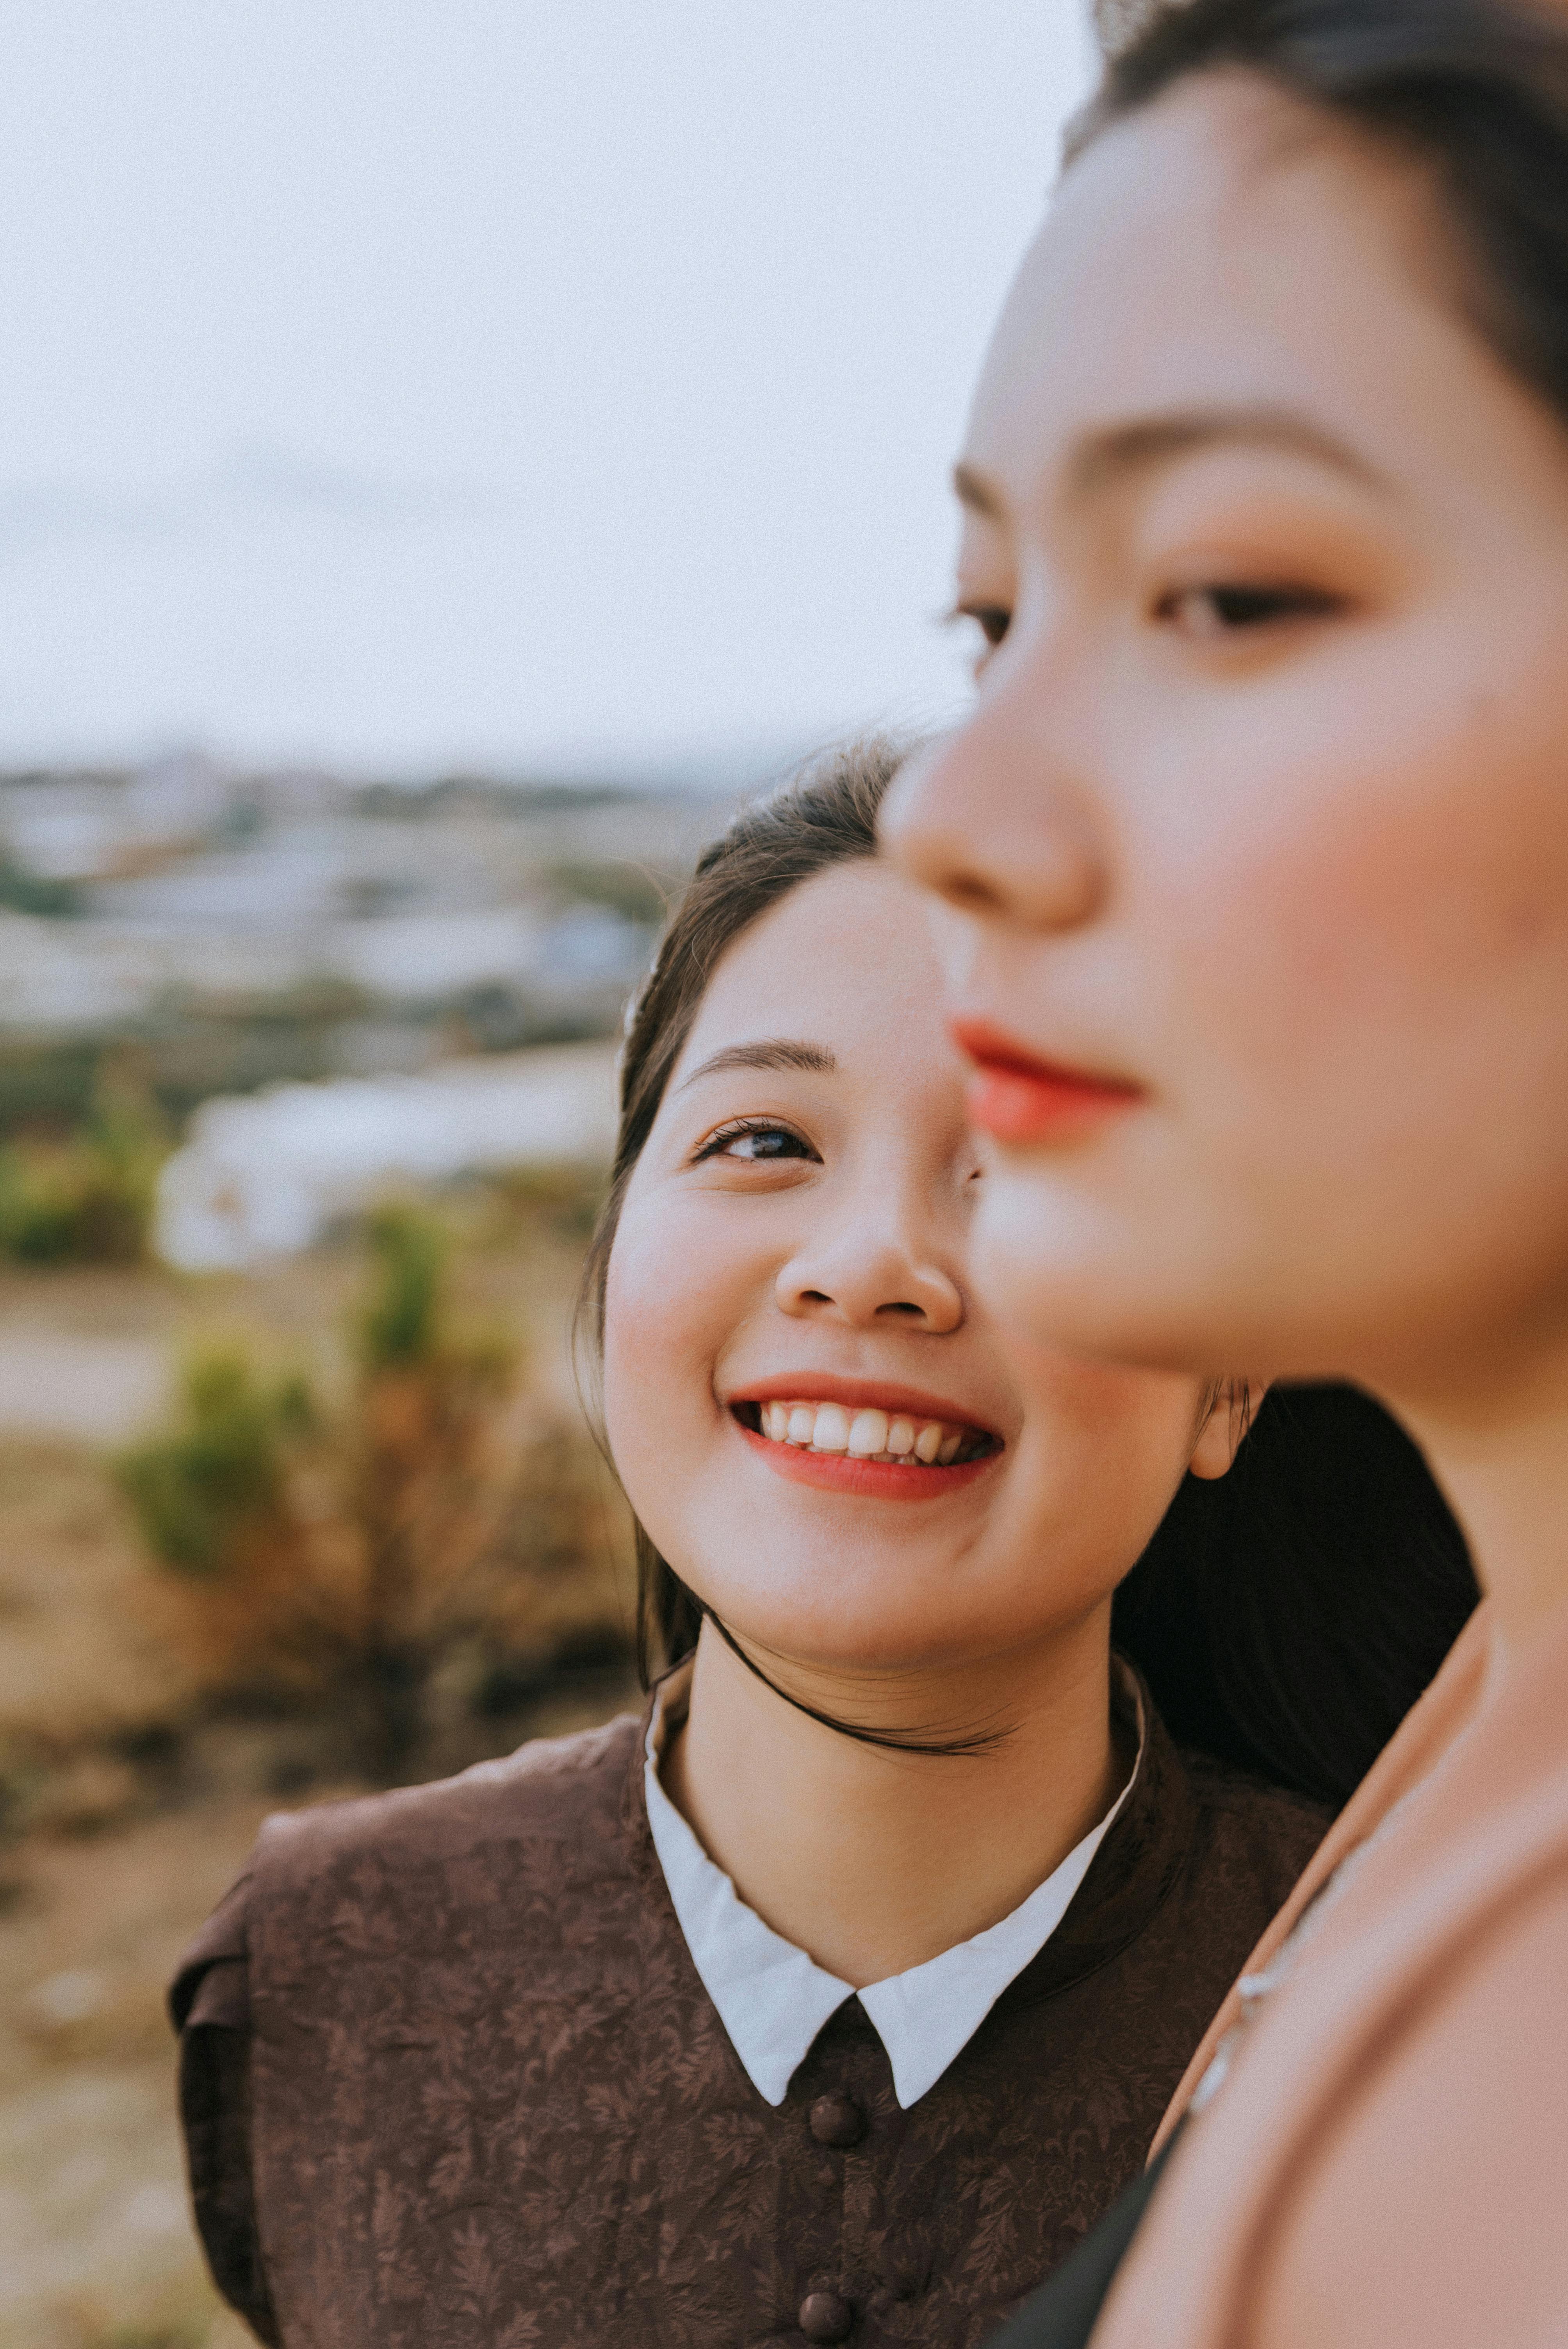 A woman smiling while looking at another woman | Source: Pexels